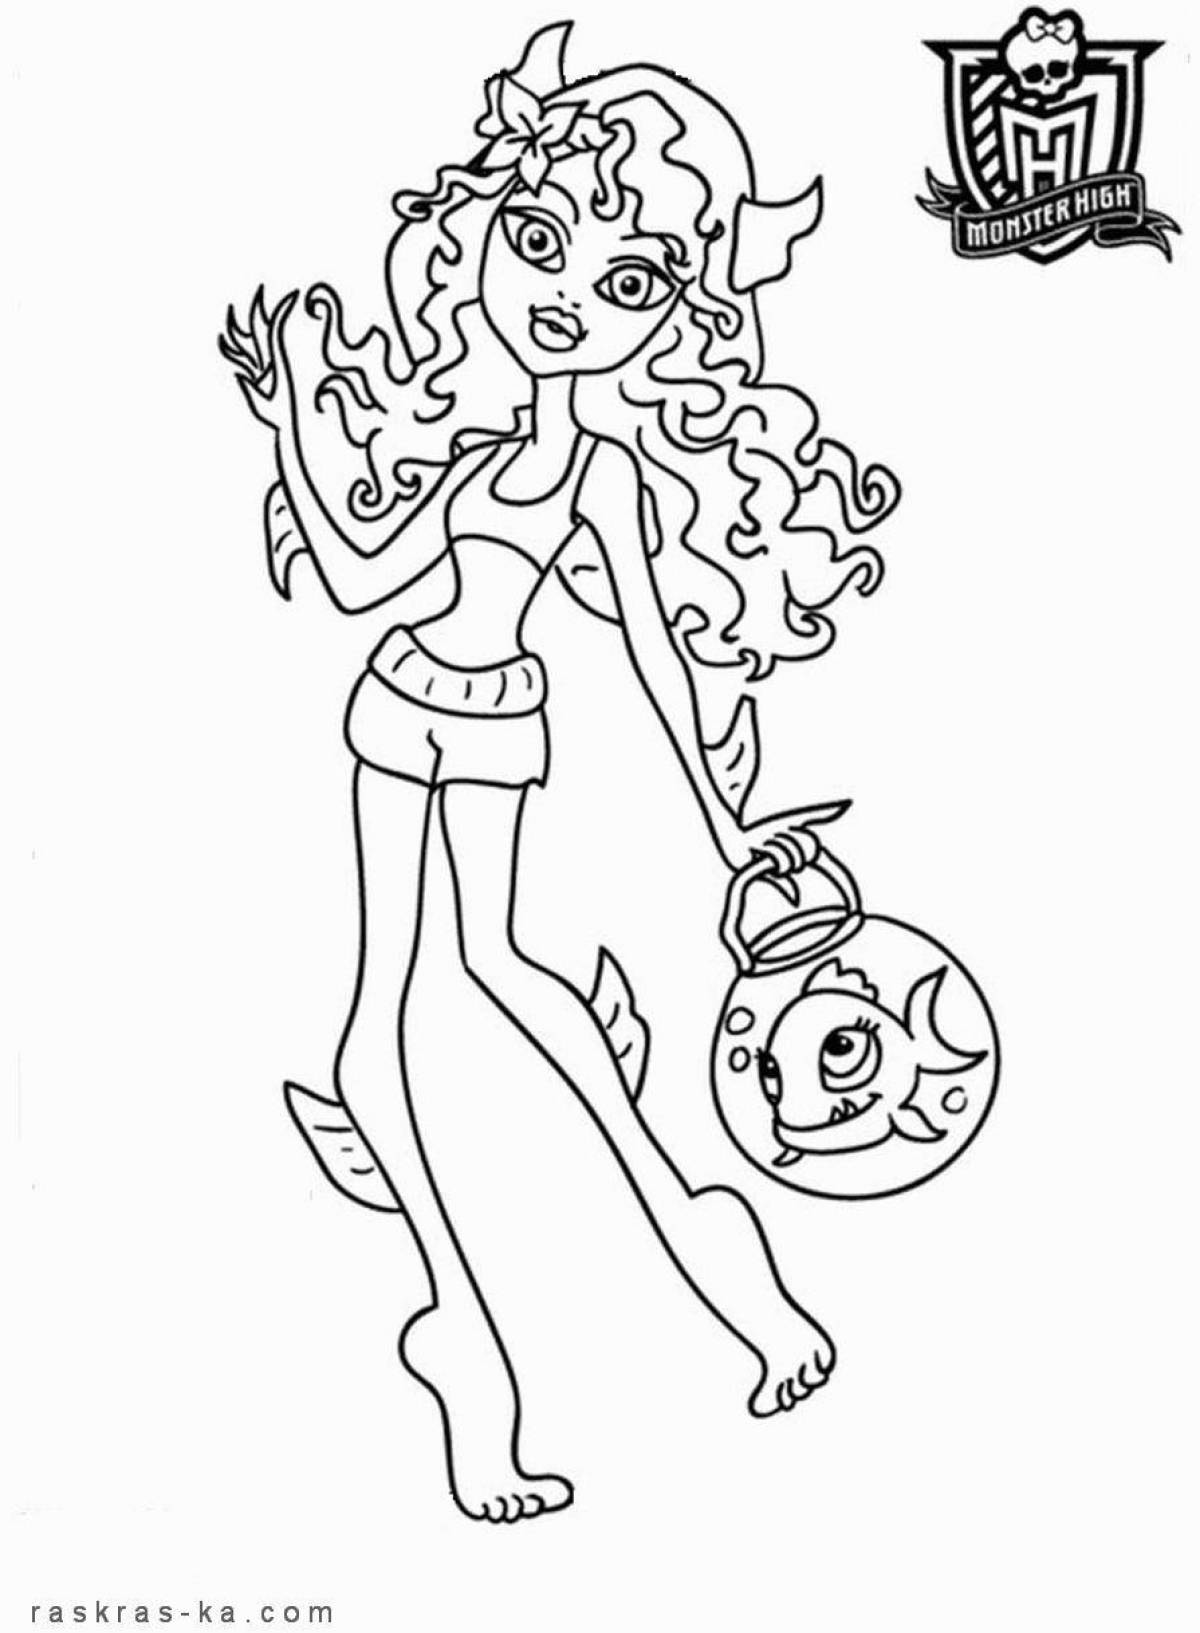 Flaming fire monster coloring page